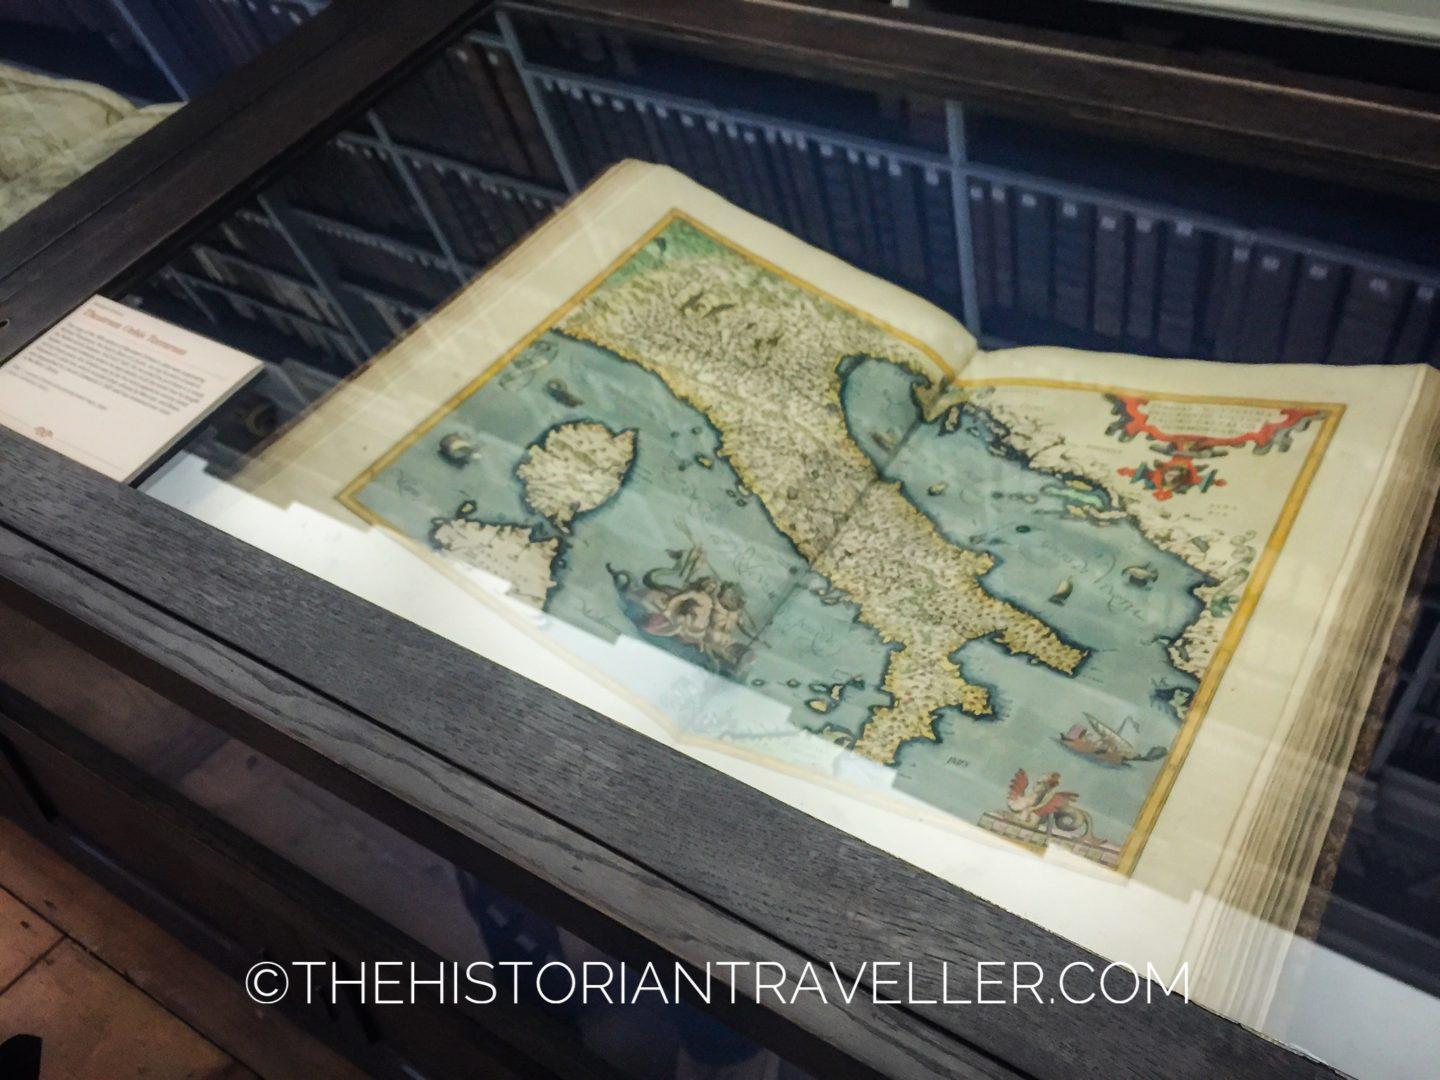 Map of Italy displayed at Wren Library, Lincoln